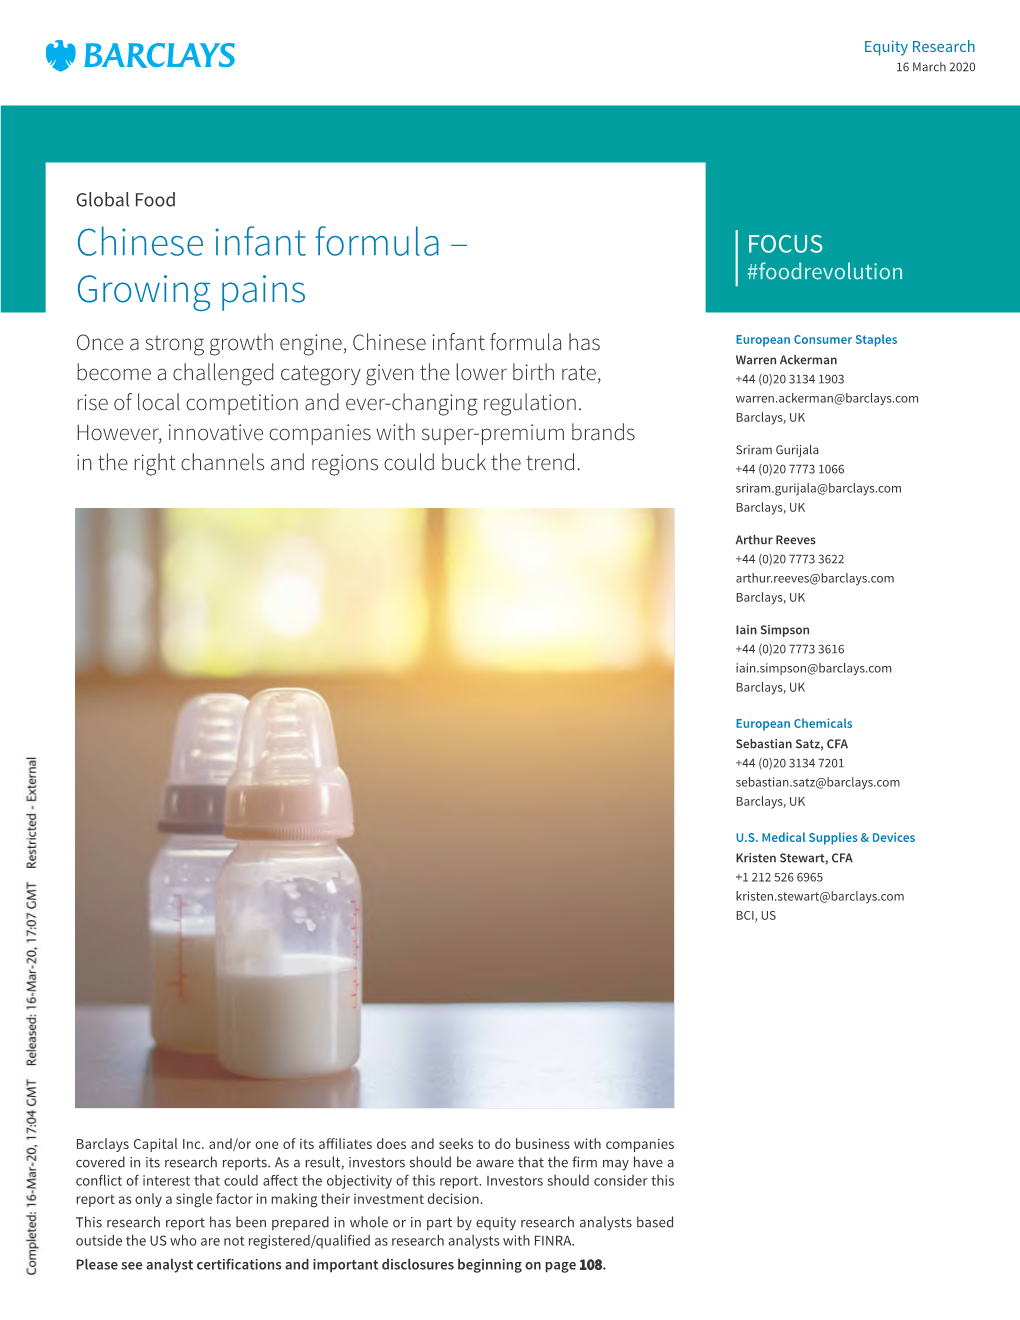 Chinese Infant Formula – Growing Pains